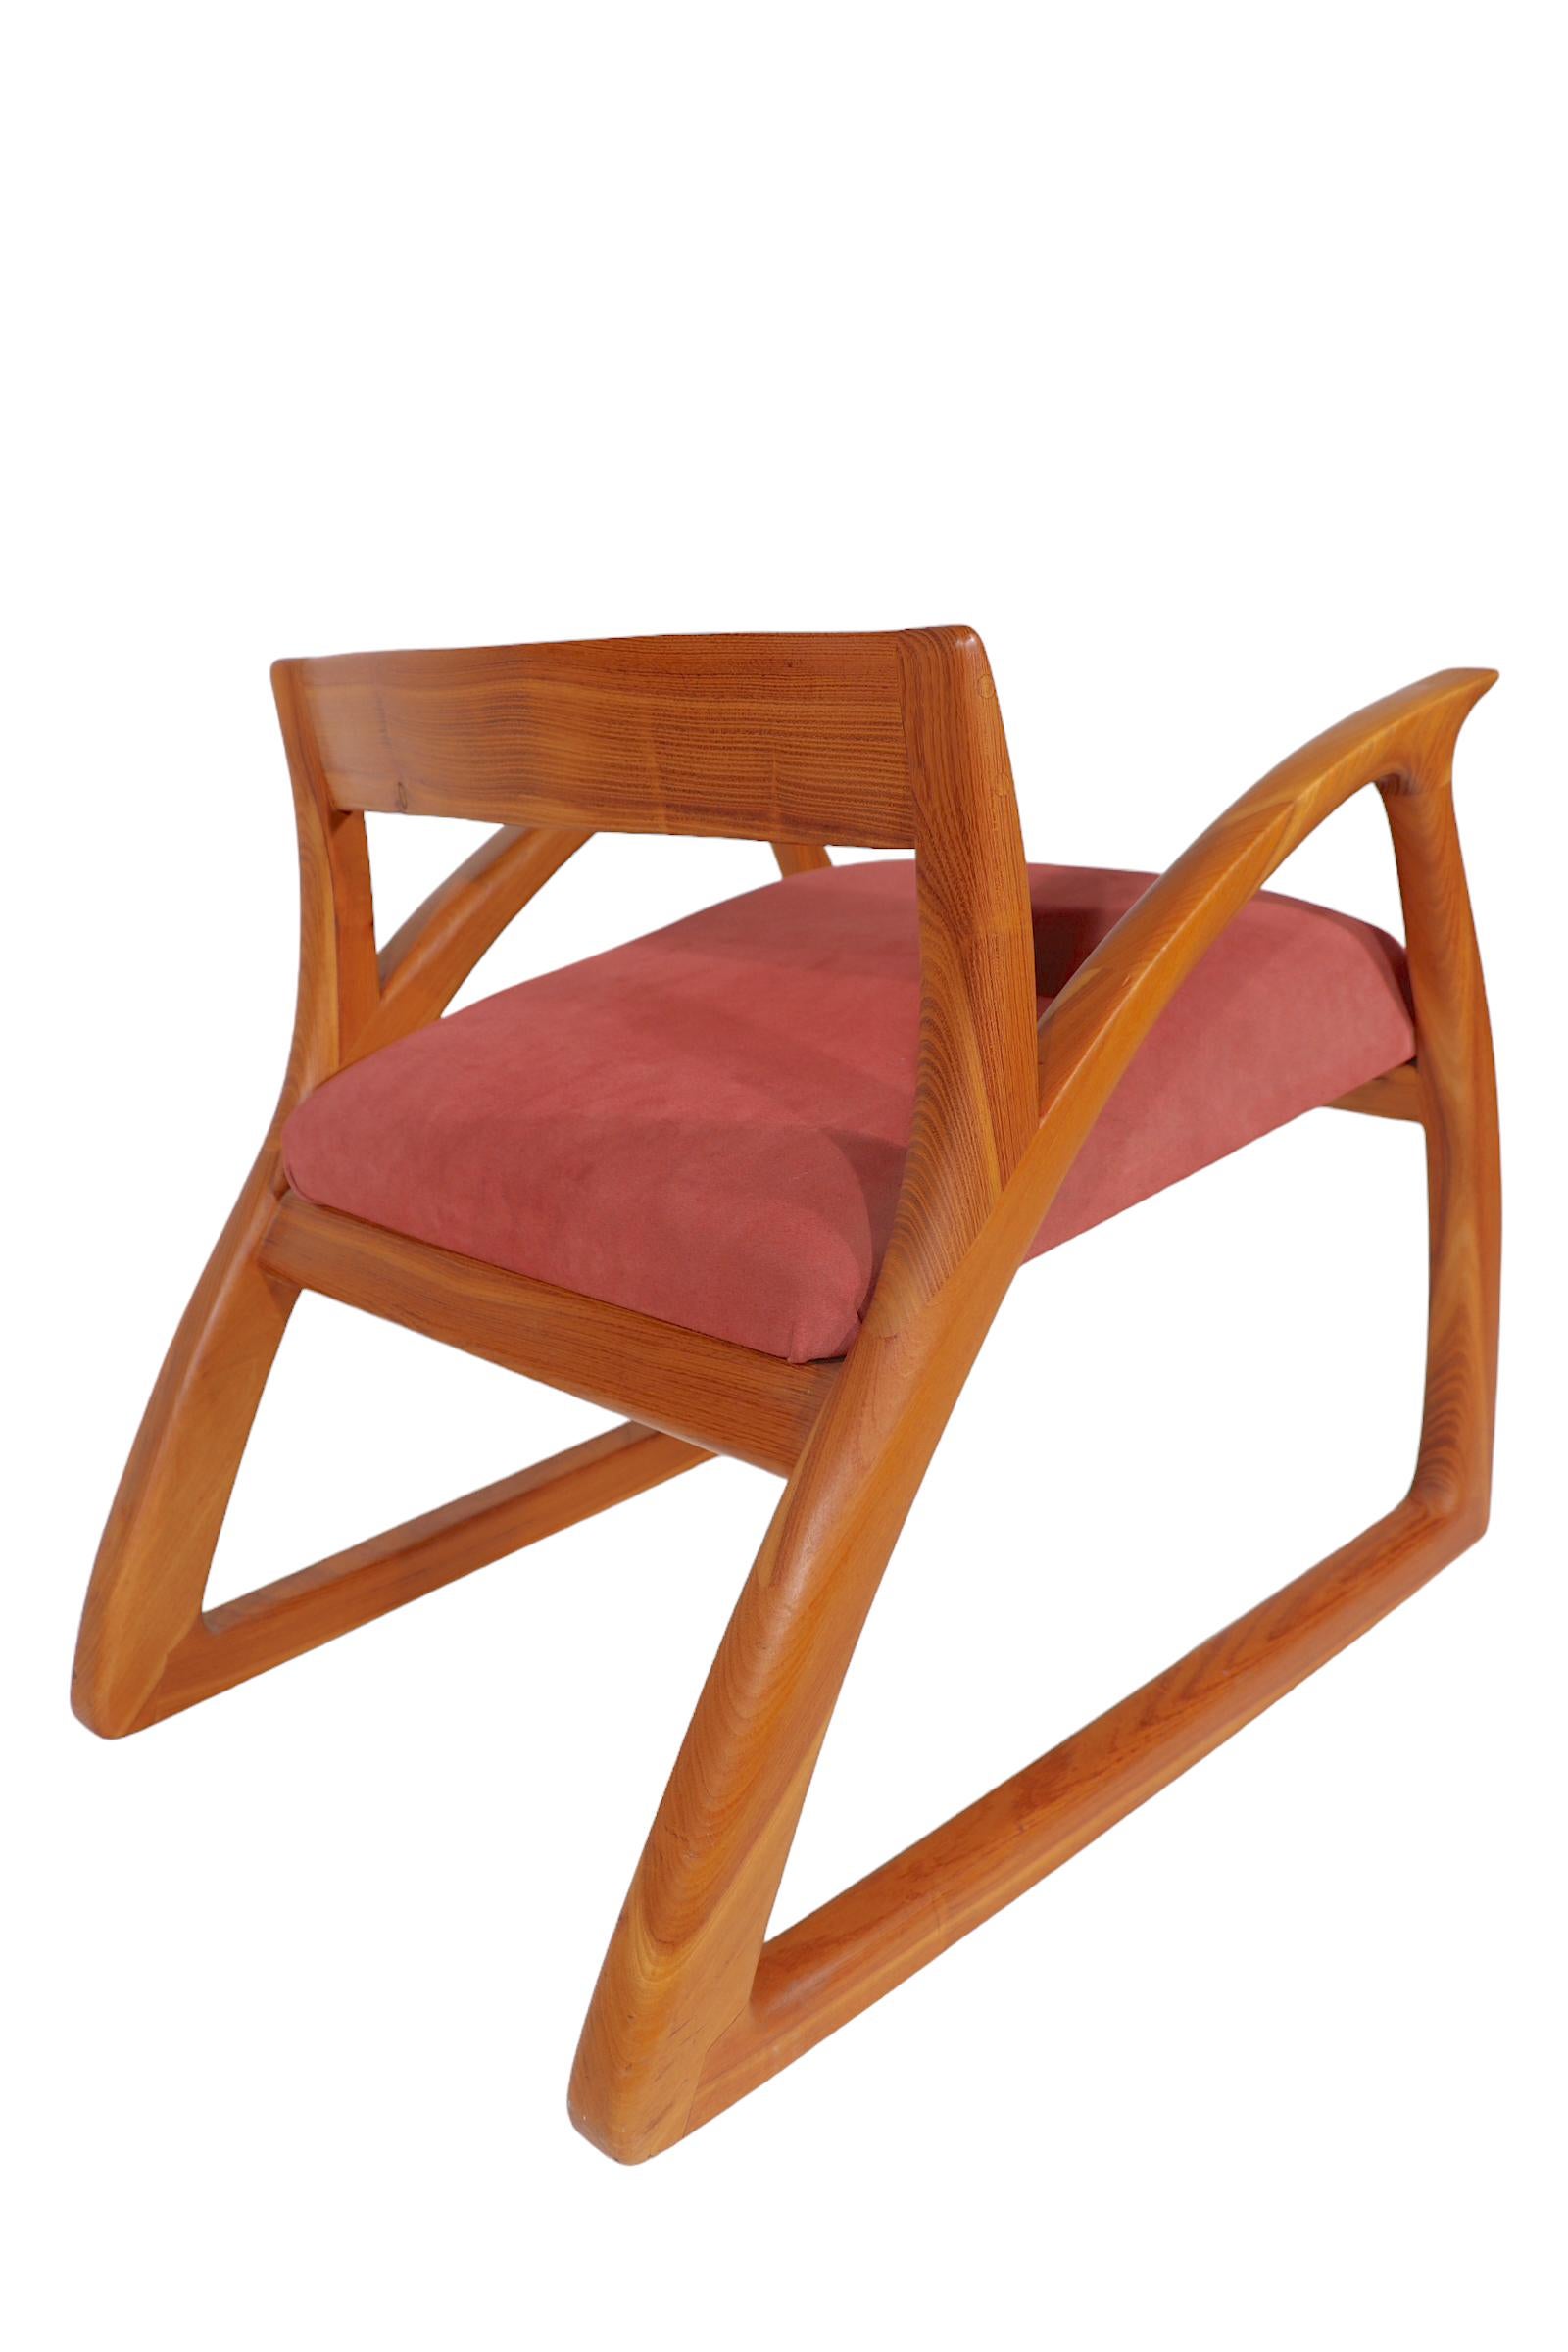 20th Century Studio Hand Made - Crafted Wood Arm / Lounge Chair For Sale